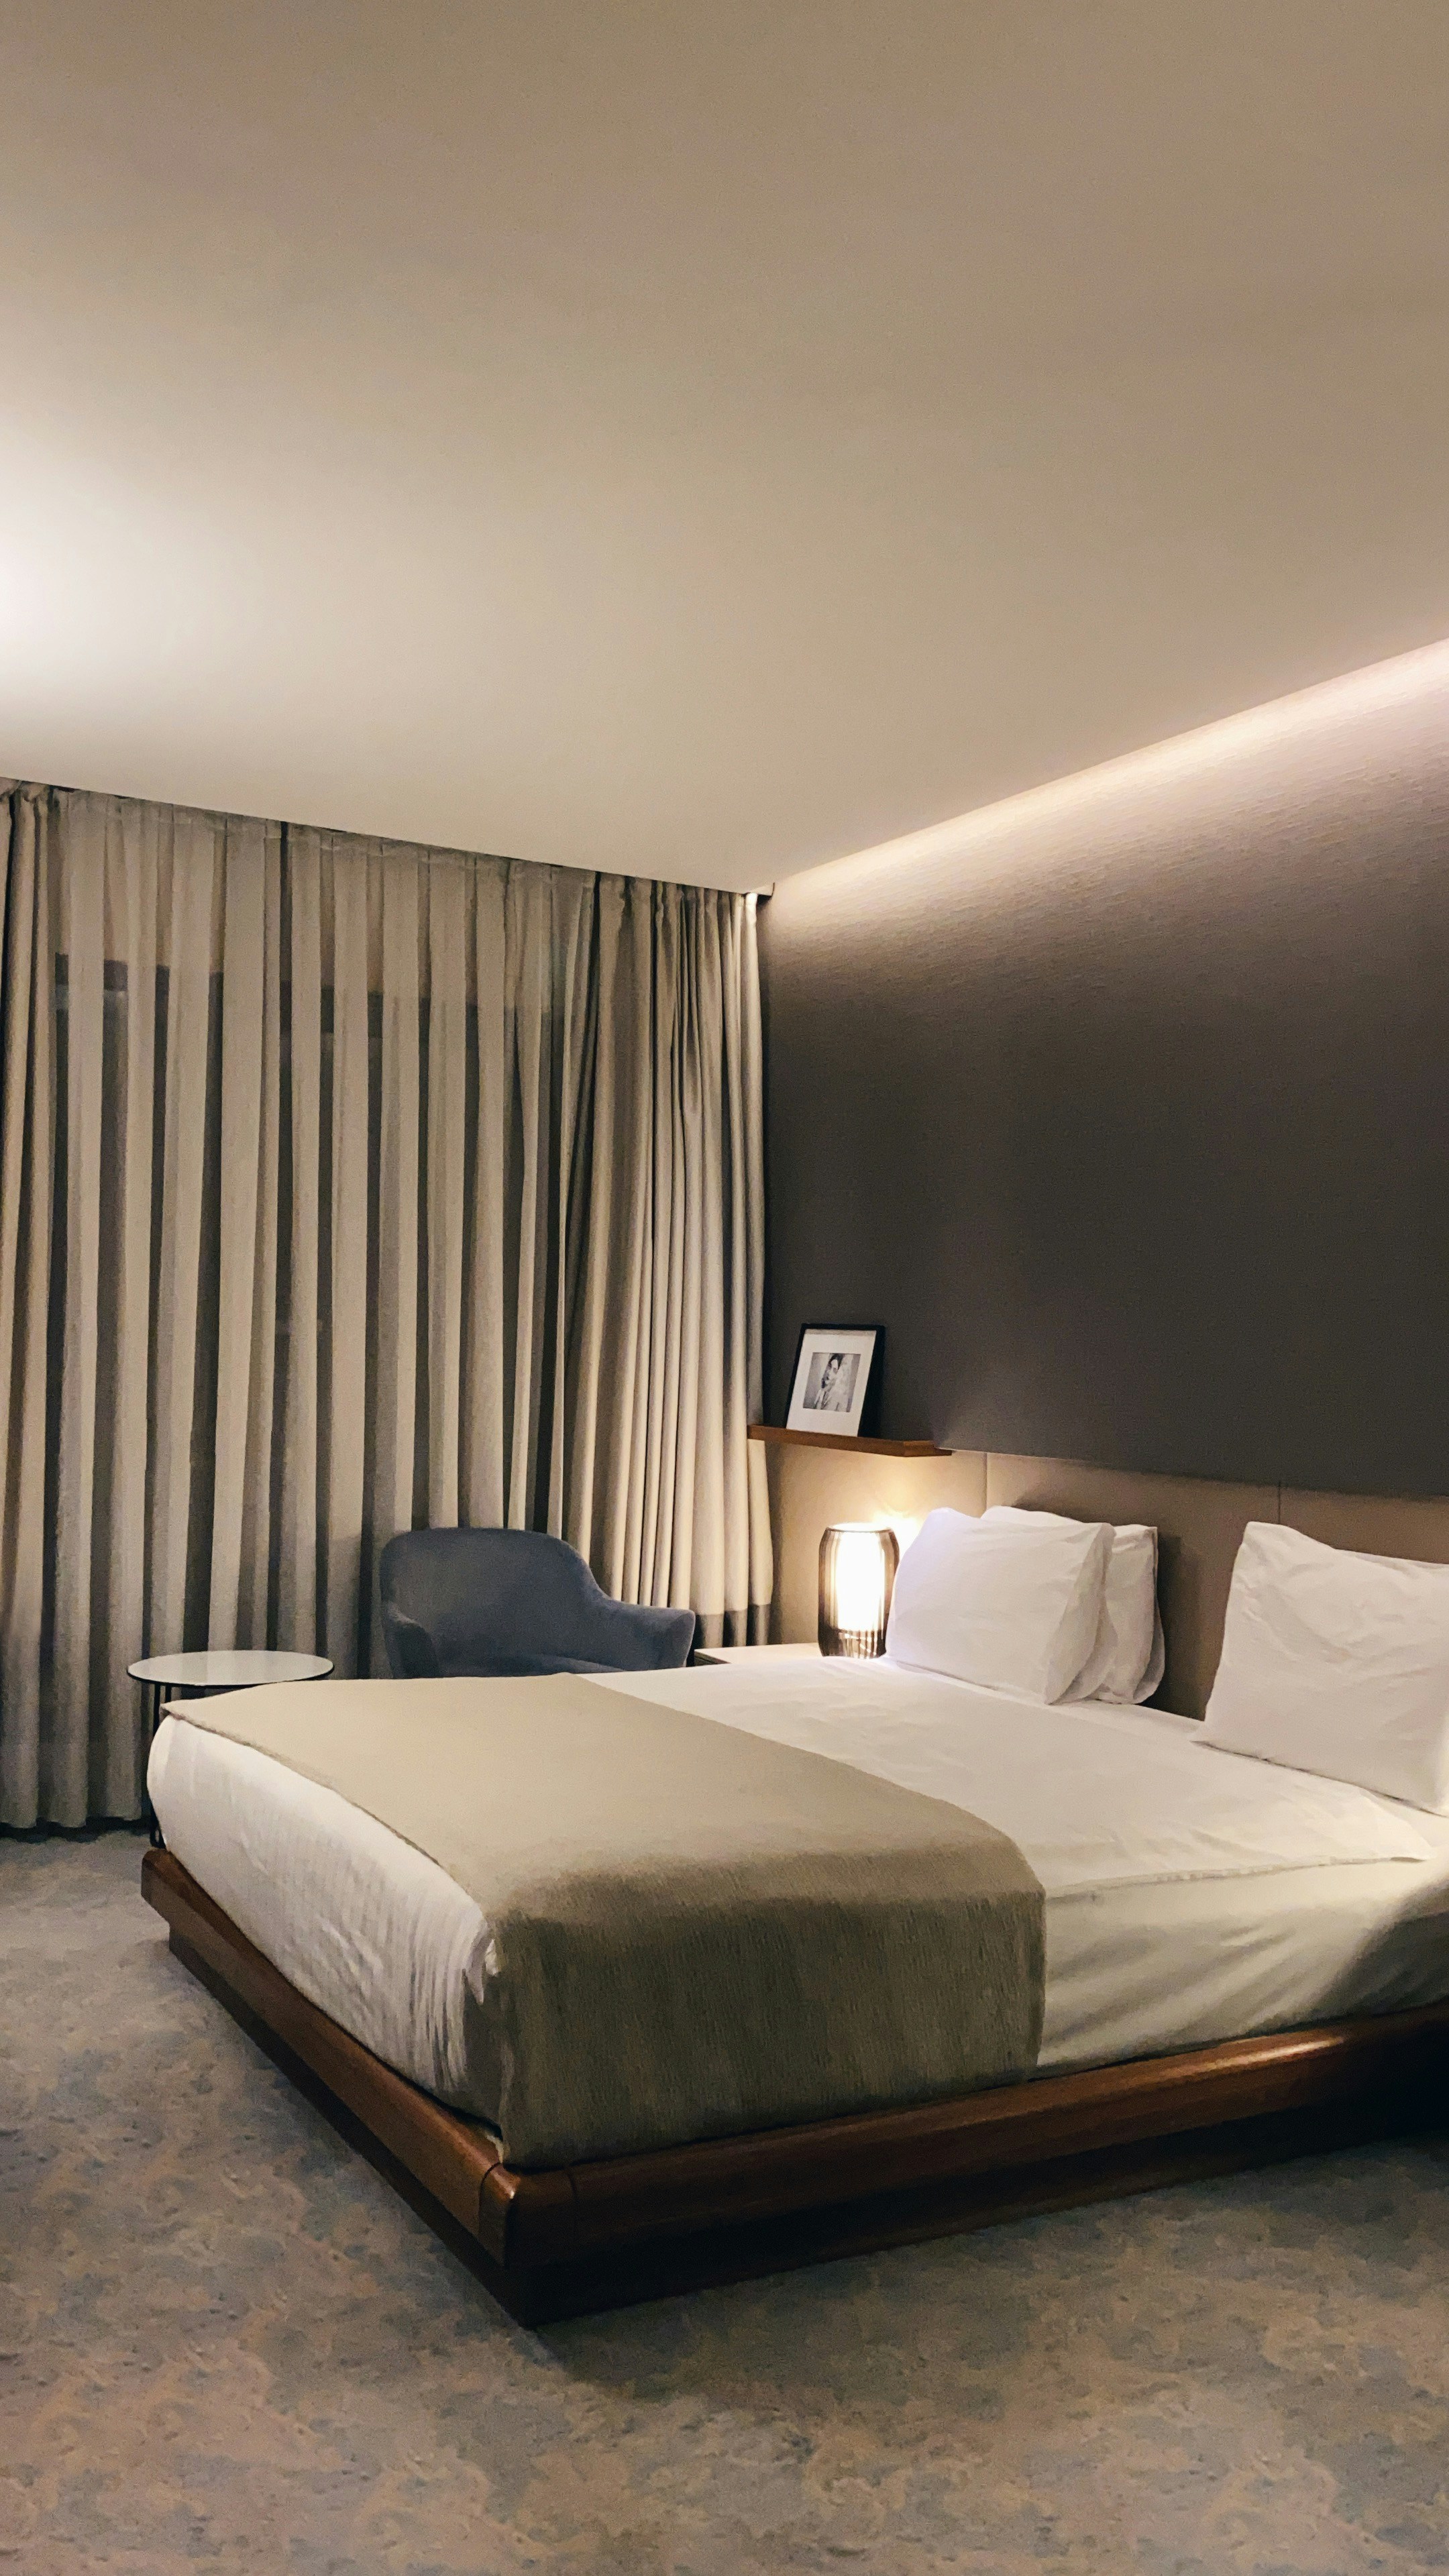 500+ Hotel Room Pictures [HQ] - Download Free Images on Unsplash